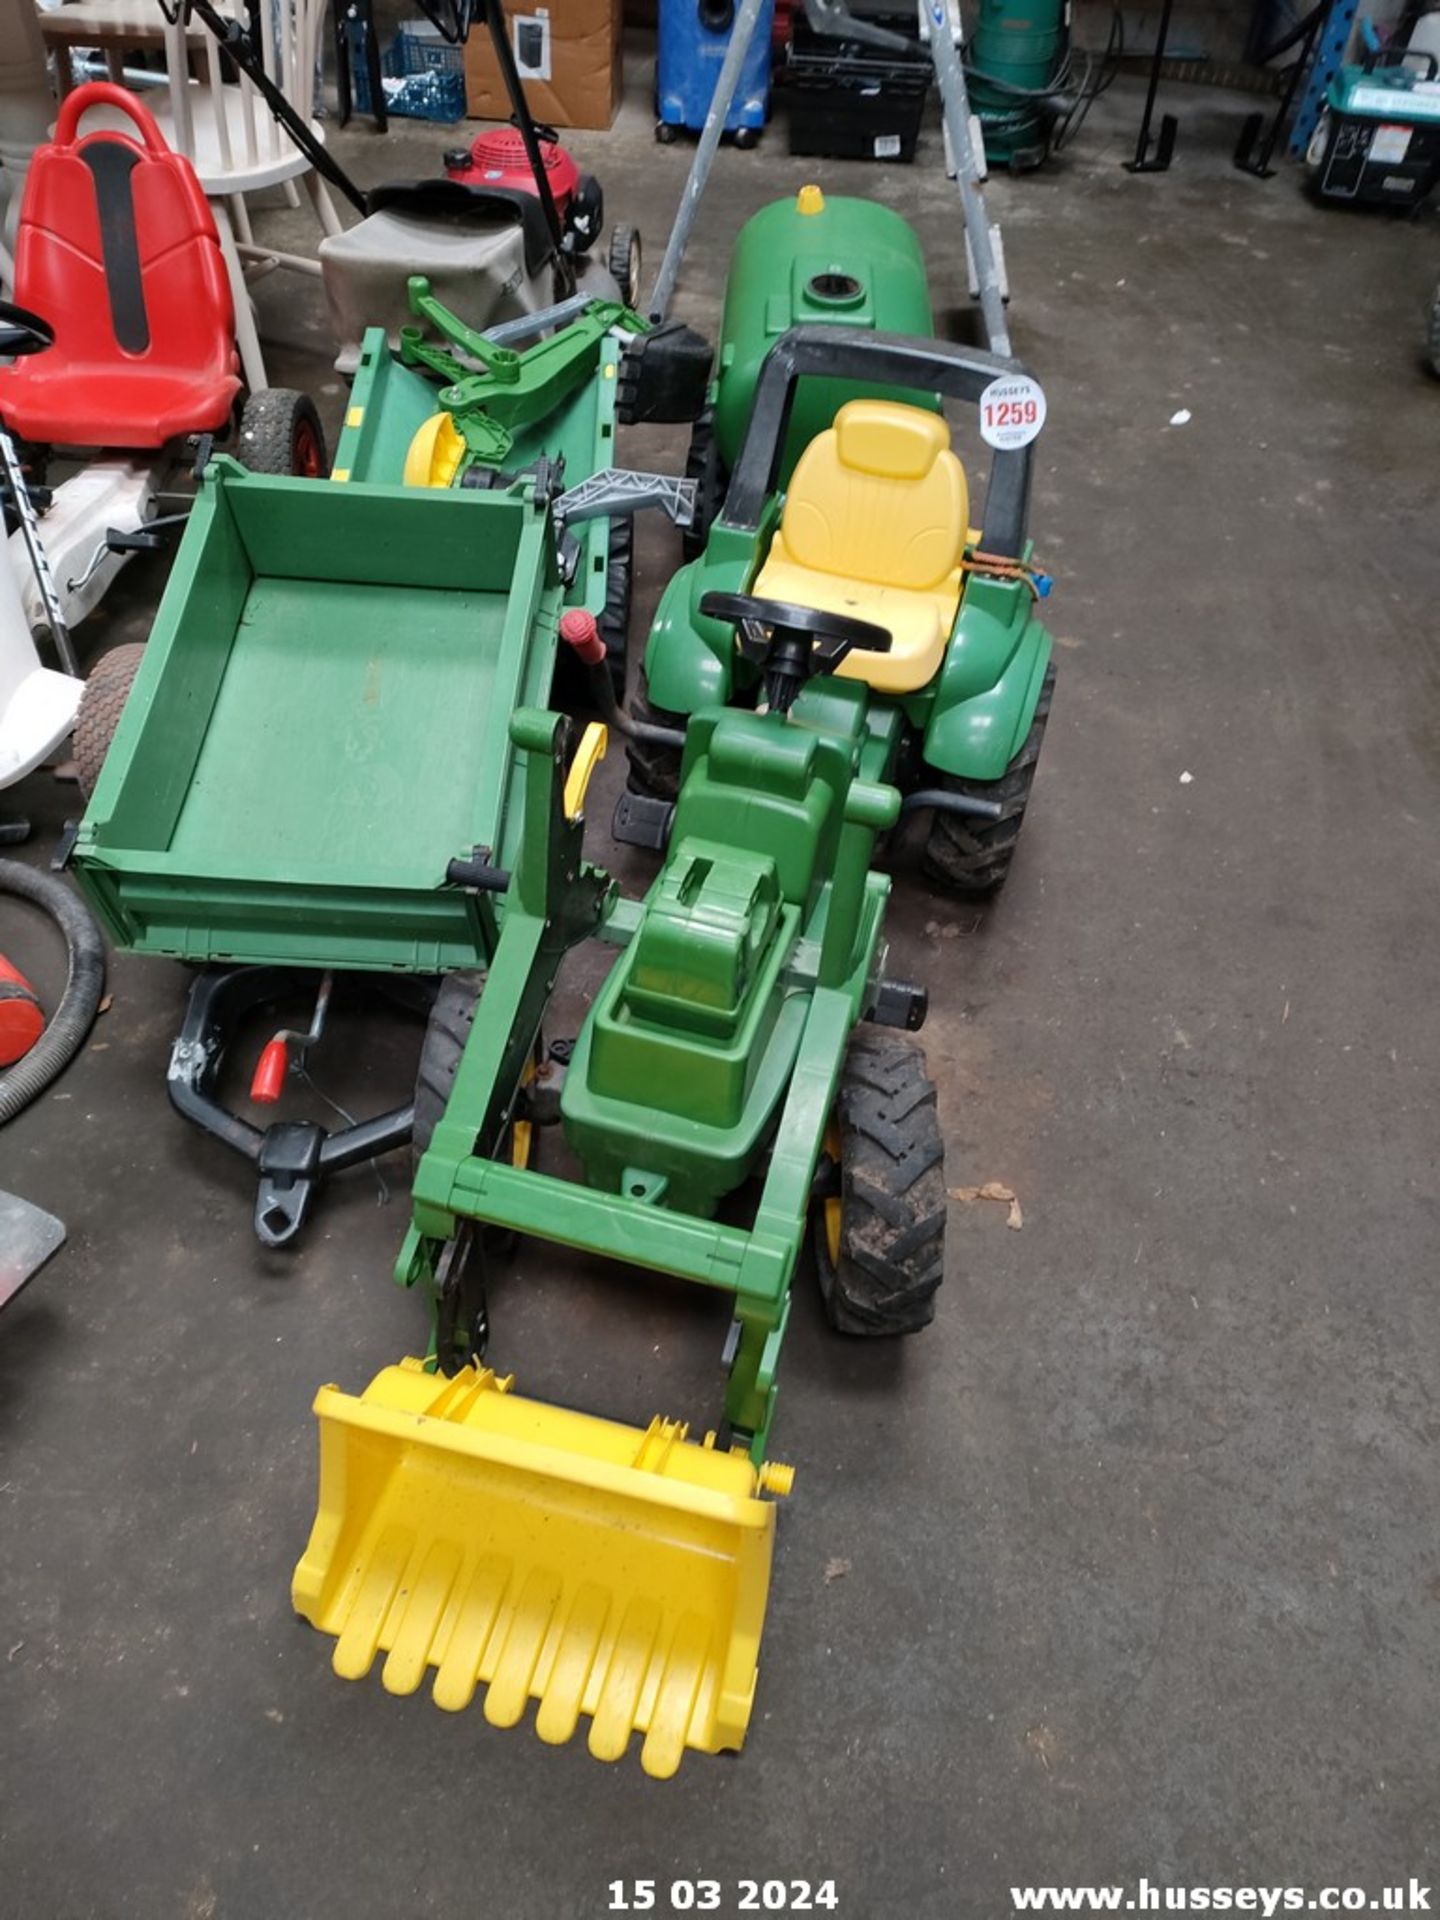 CHILDS TRACTOR C.W 2 TRAILERS, WATER BOWSER, WINCH & BACK ACTOR